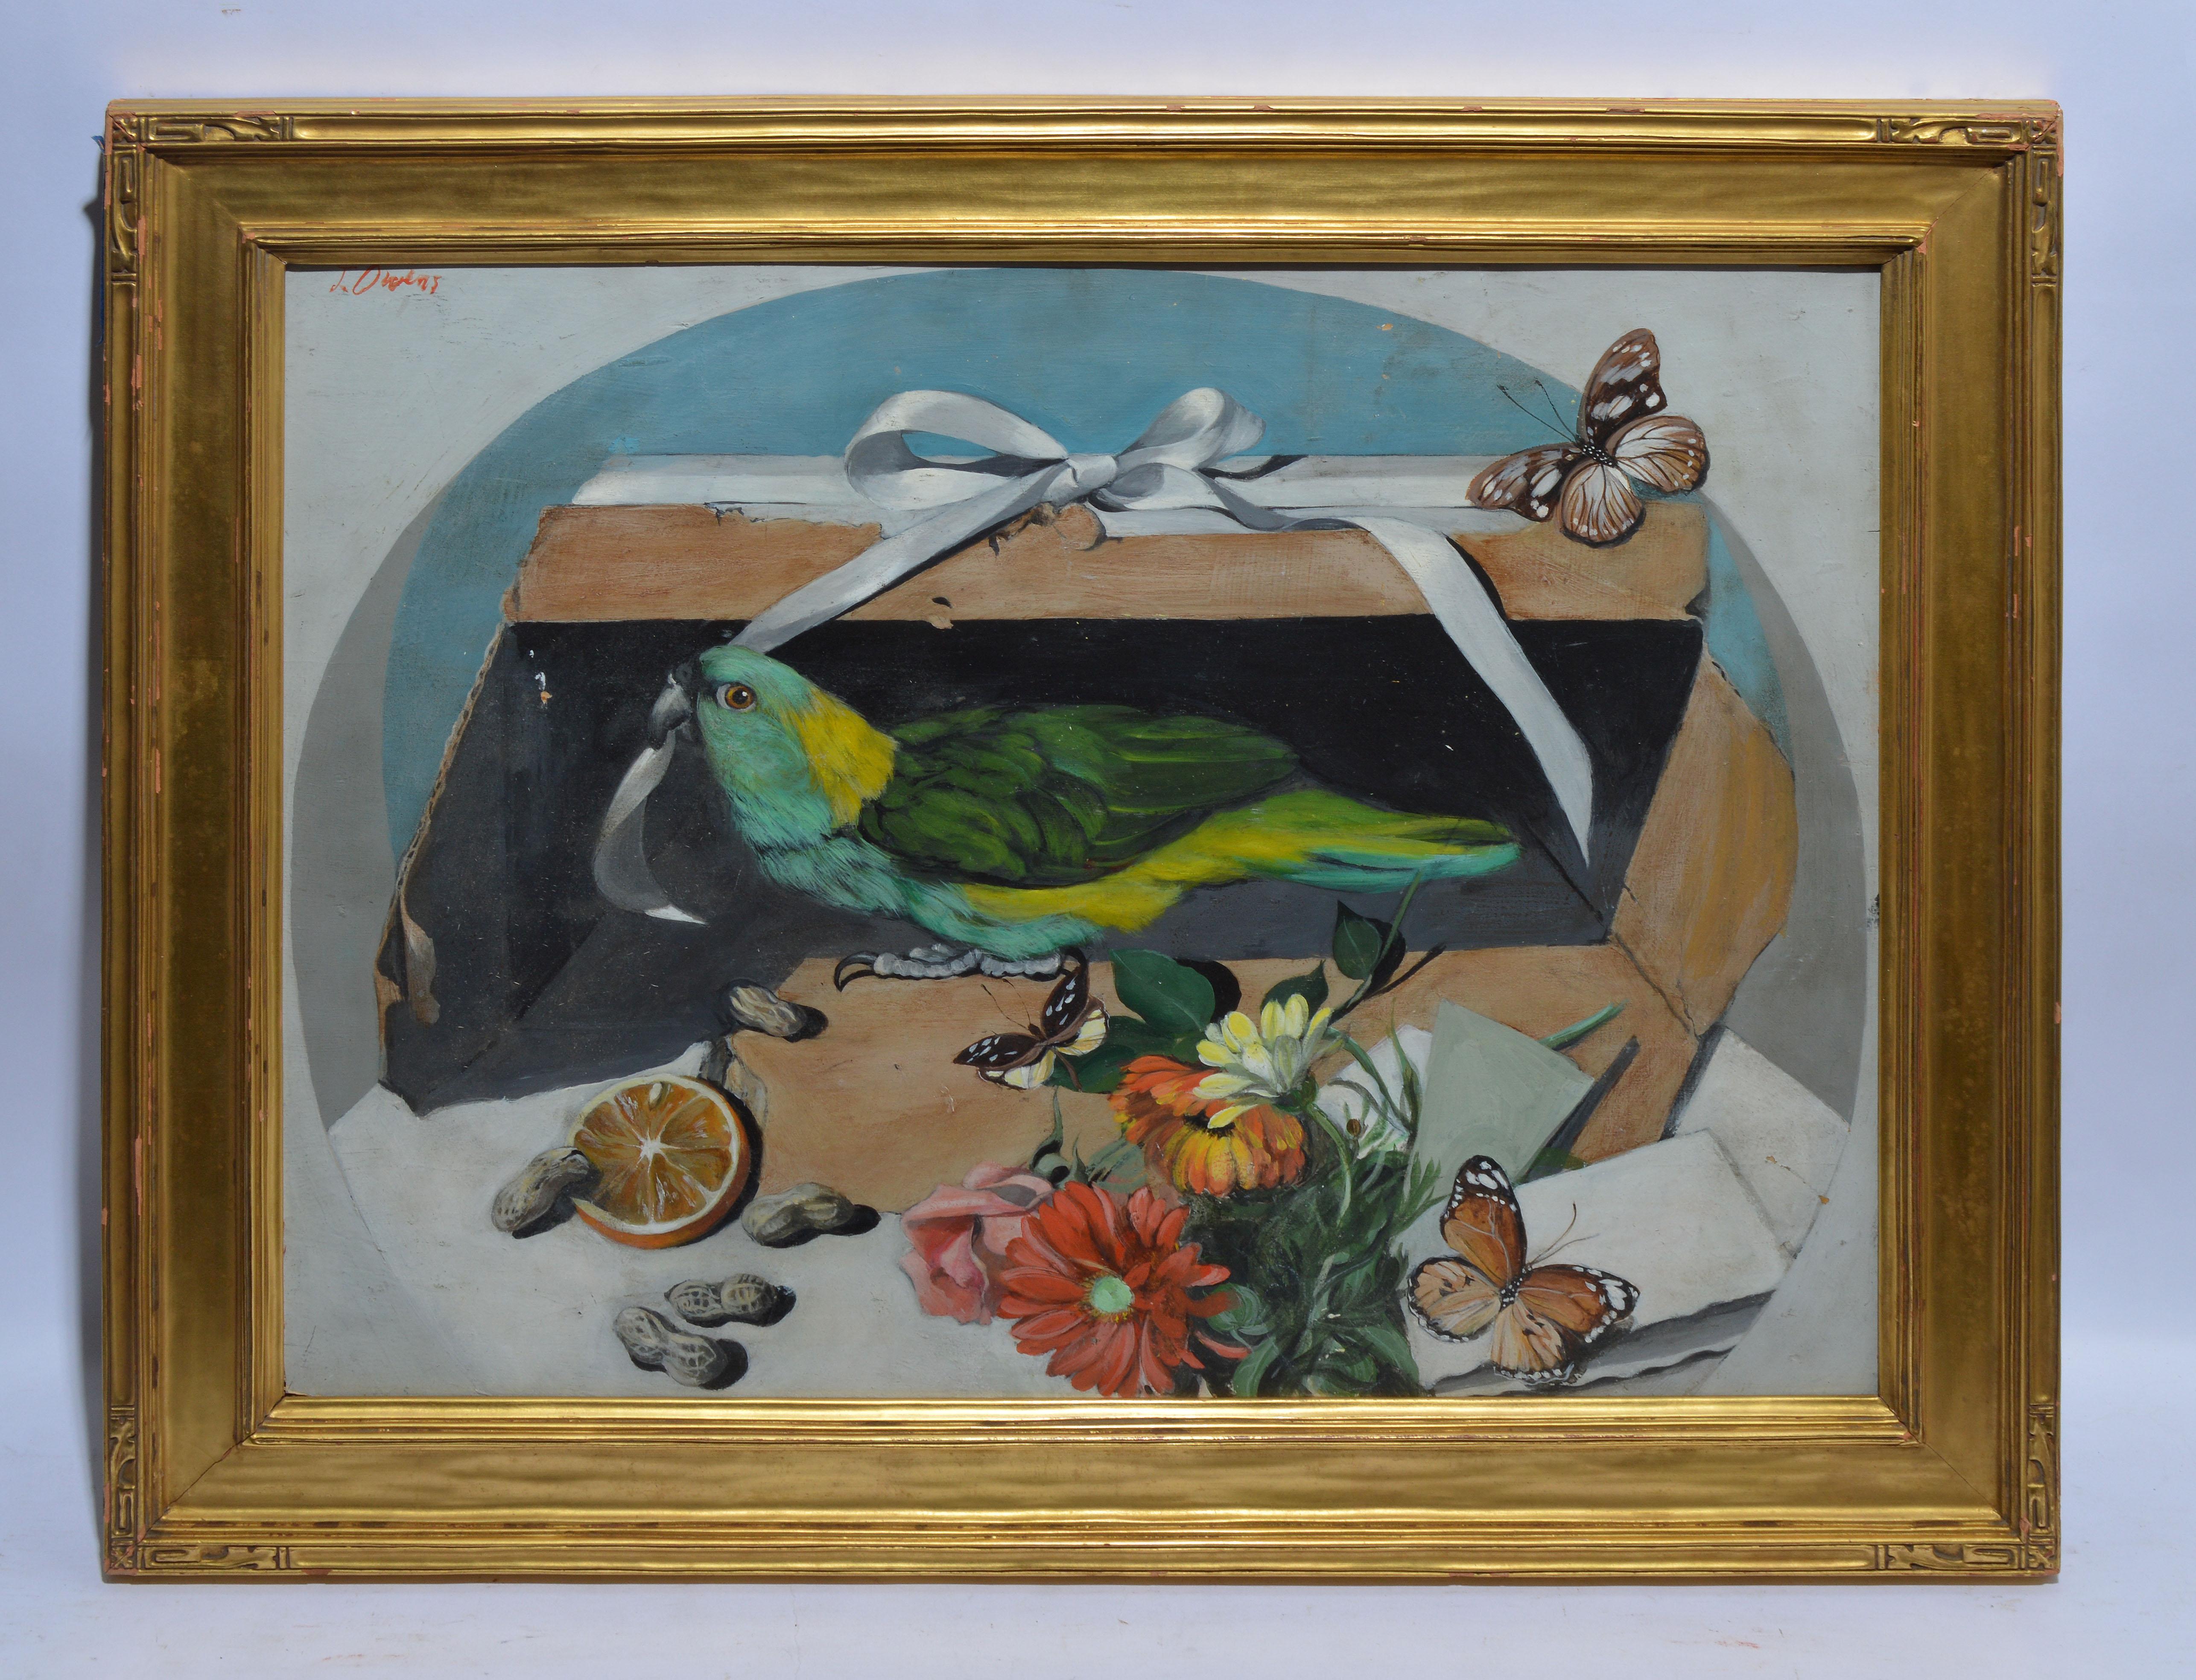 Antique American School Trompe L'Oeil Parrot & Butterfly Still Life Oil Painting - Gray Animal Painting by Unknown